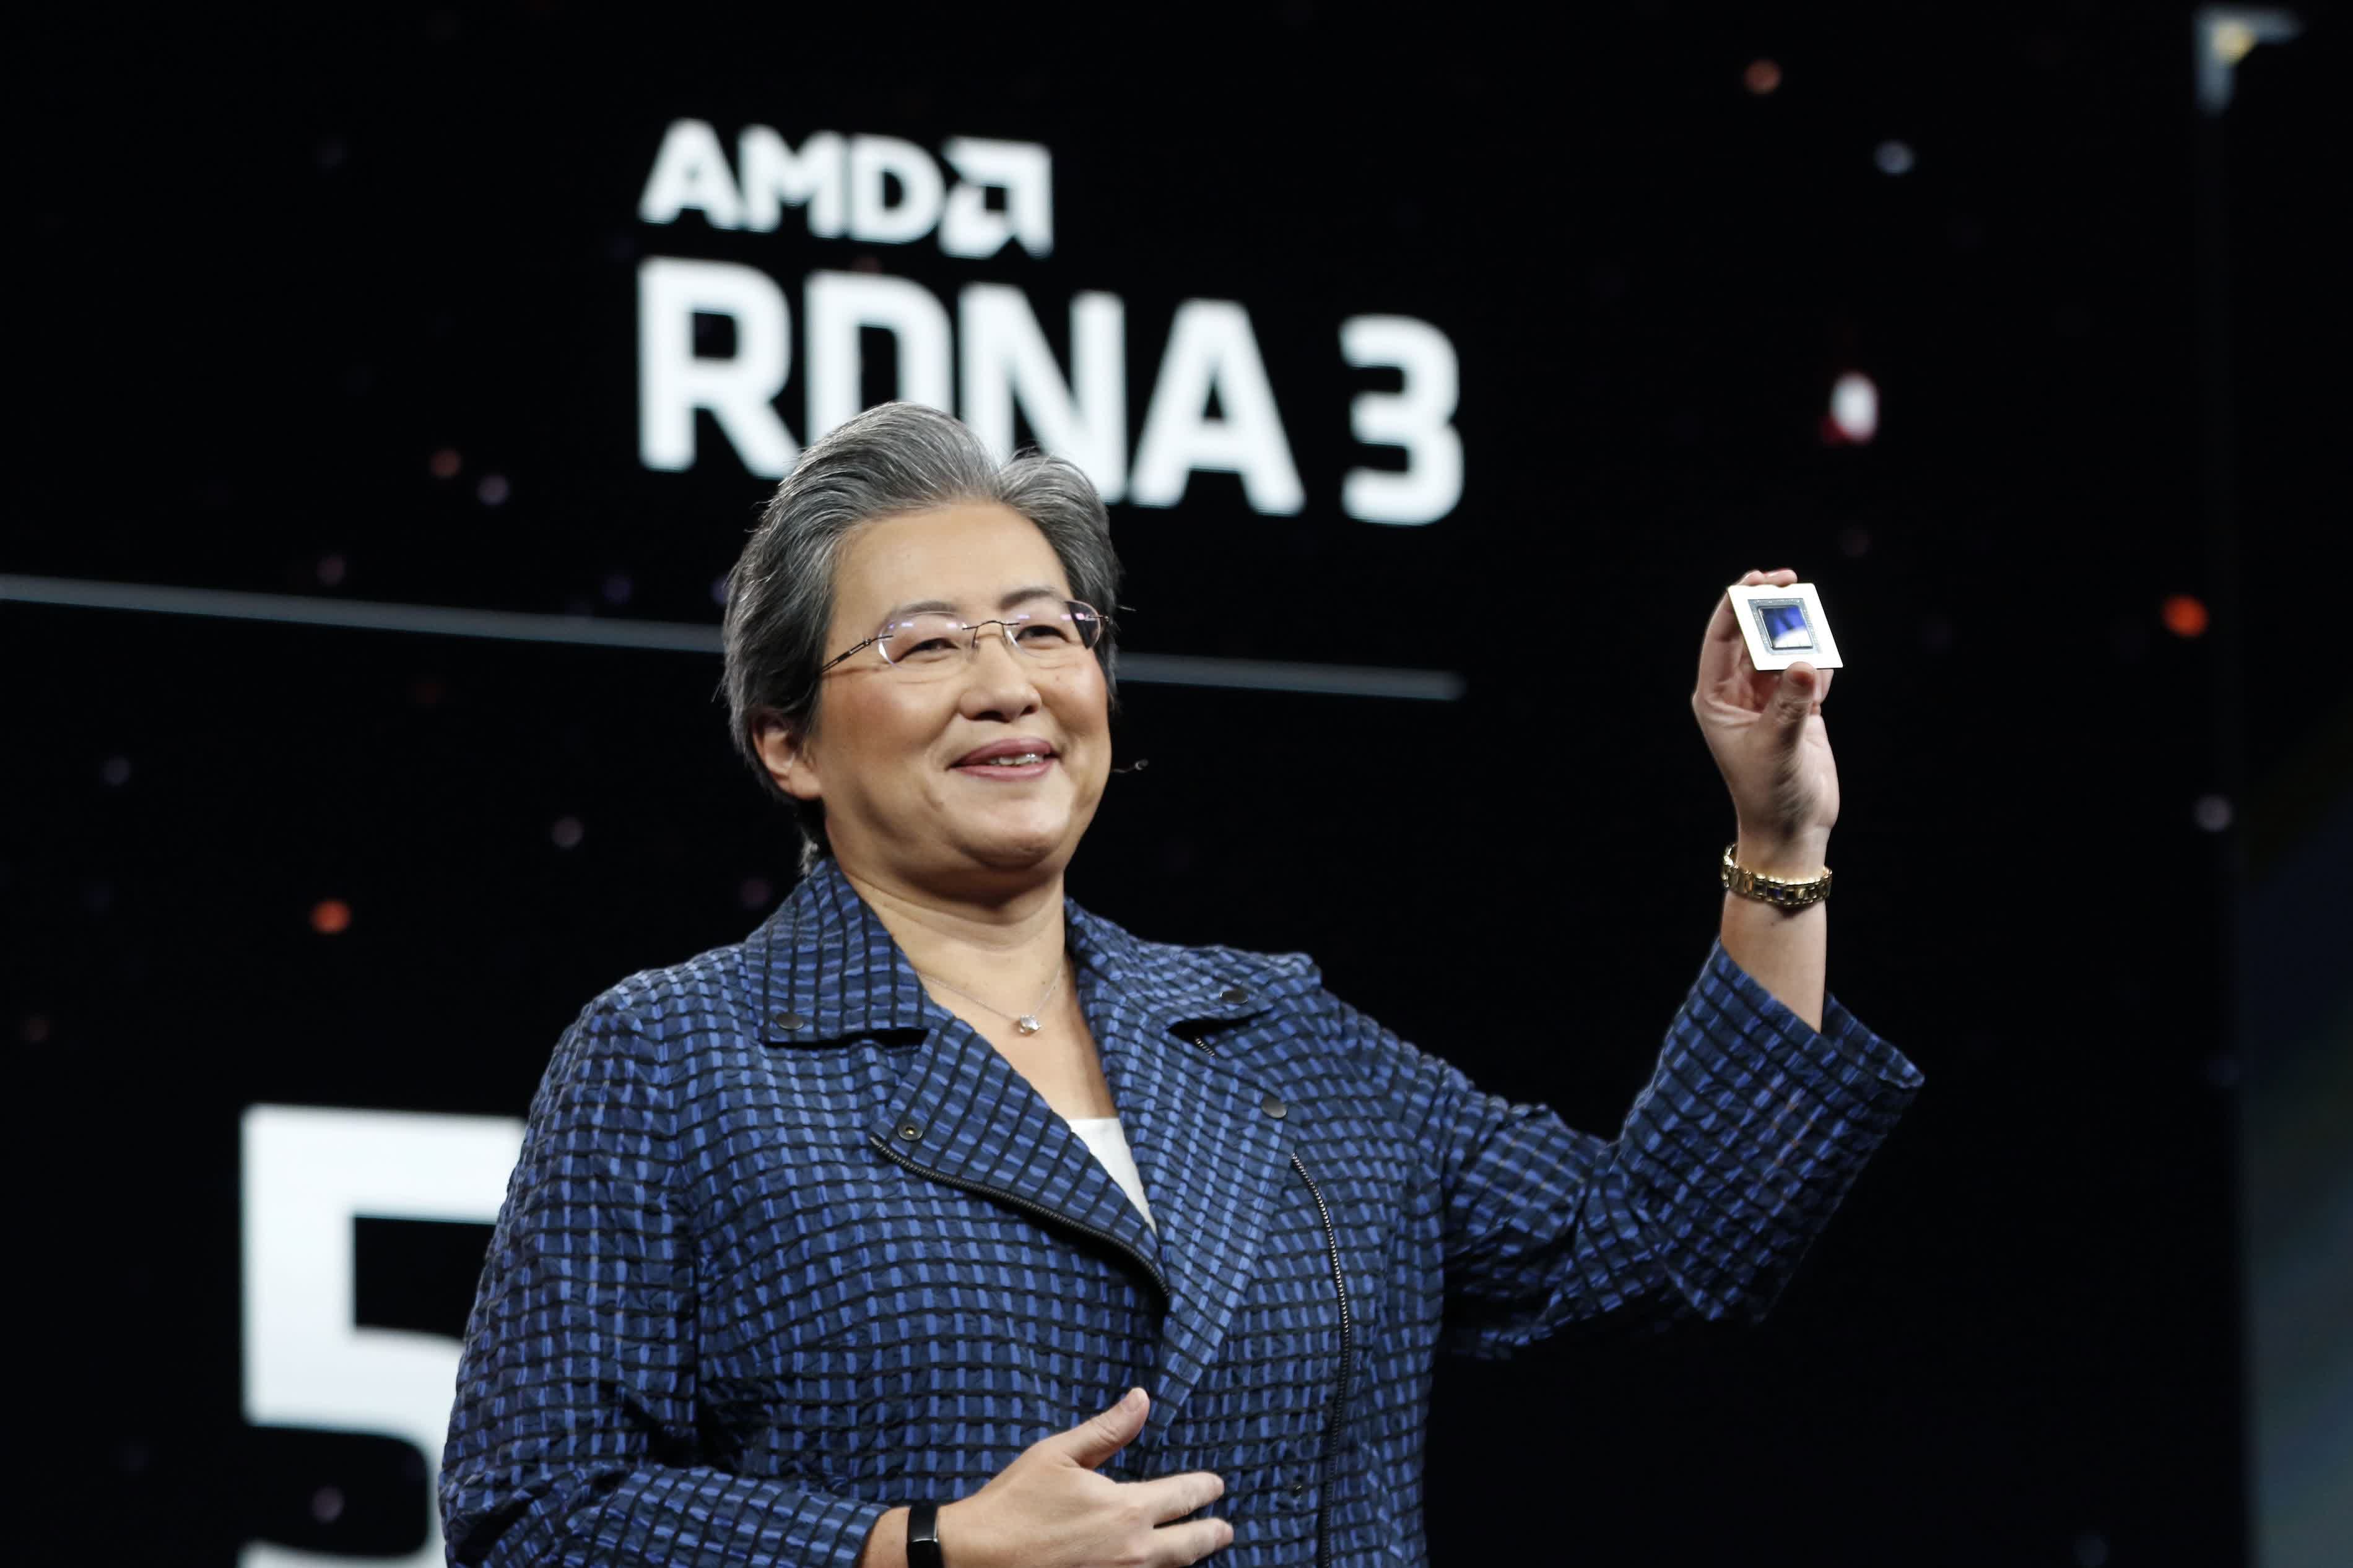 AMD CEO Lisa Su says Moore's Law isn't dead, but has slowed down